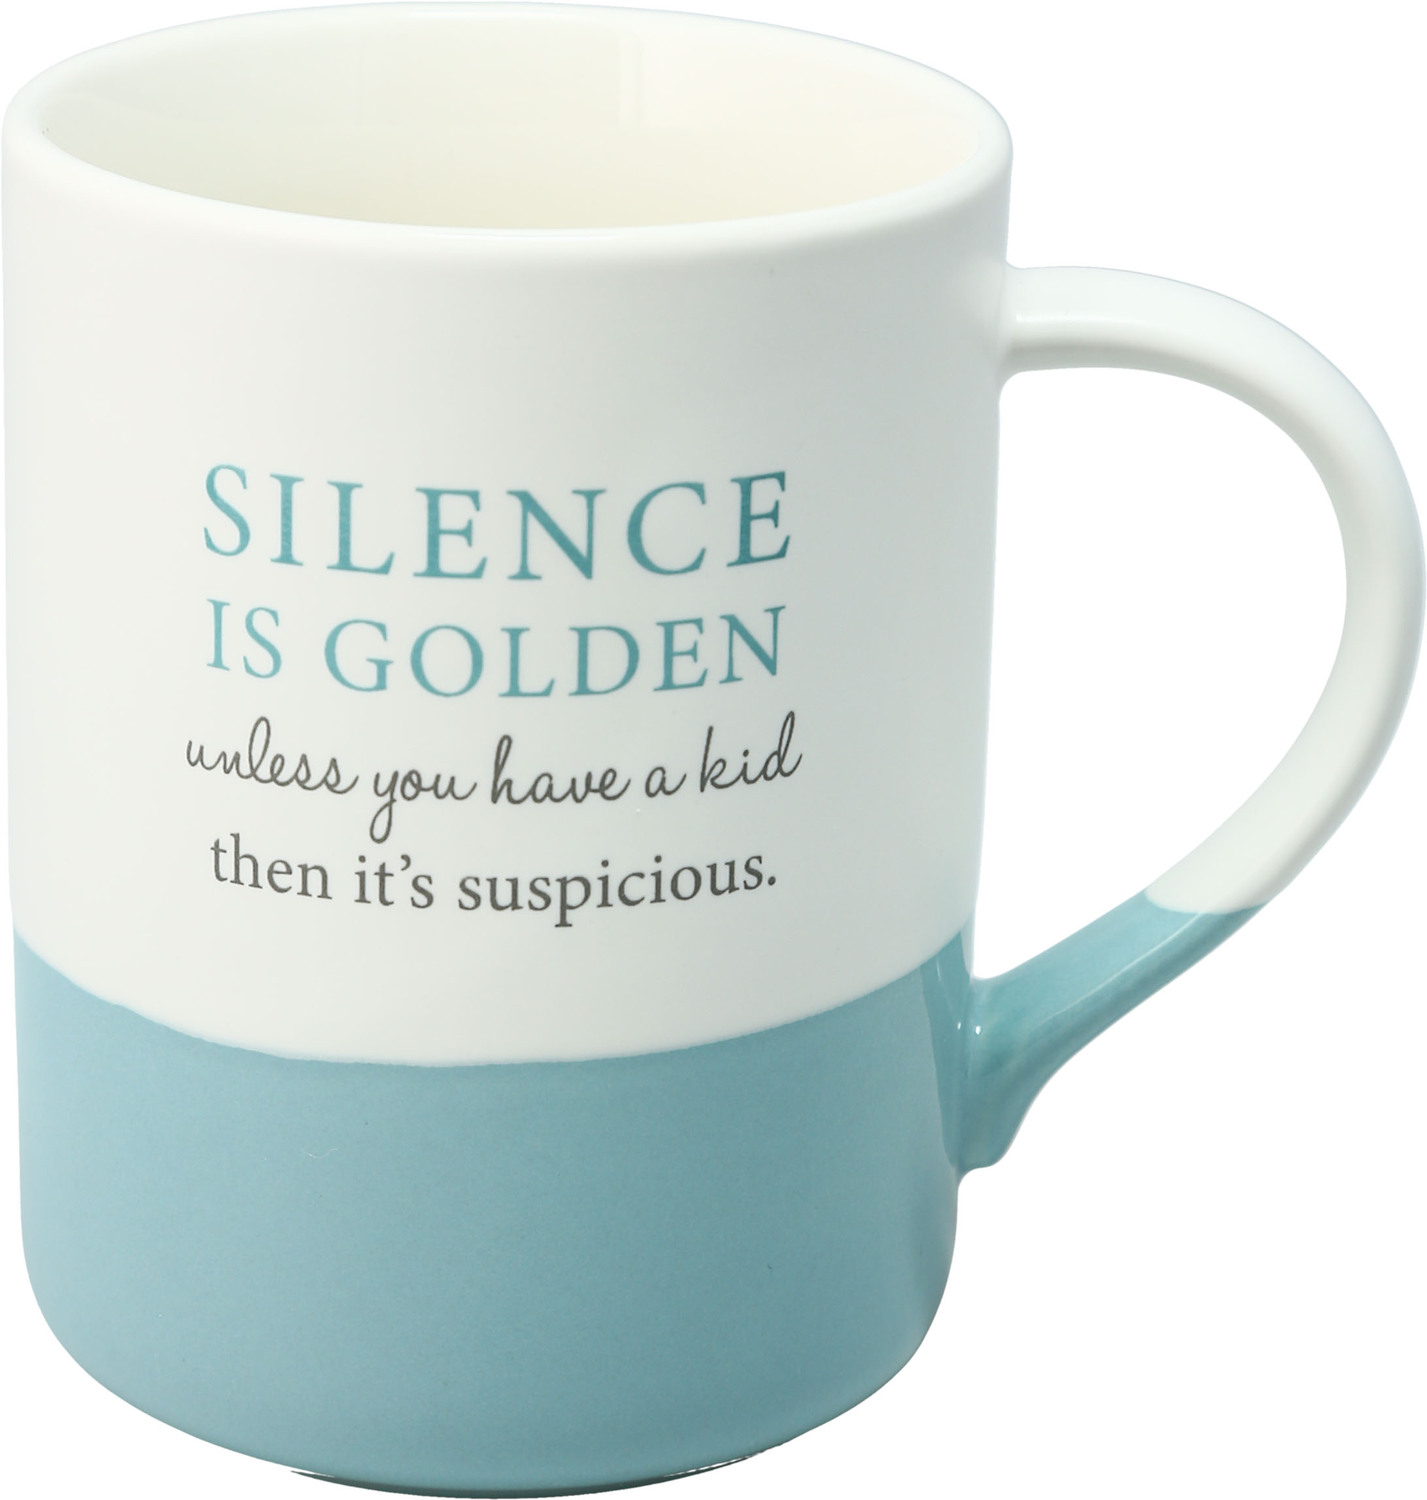 Silence Is Golden by A-Parent-ly - Silence Is Golden - 18 oz Mug